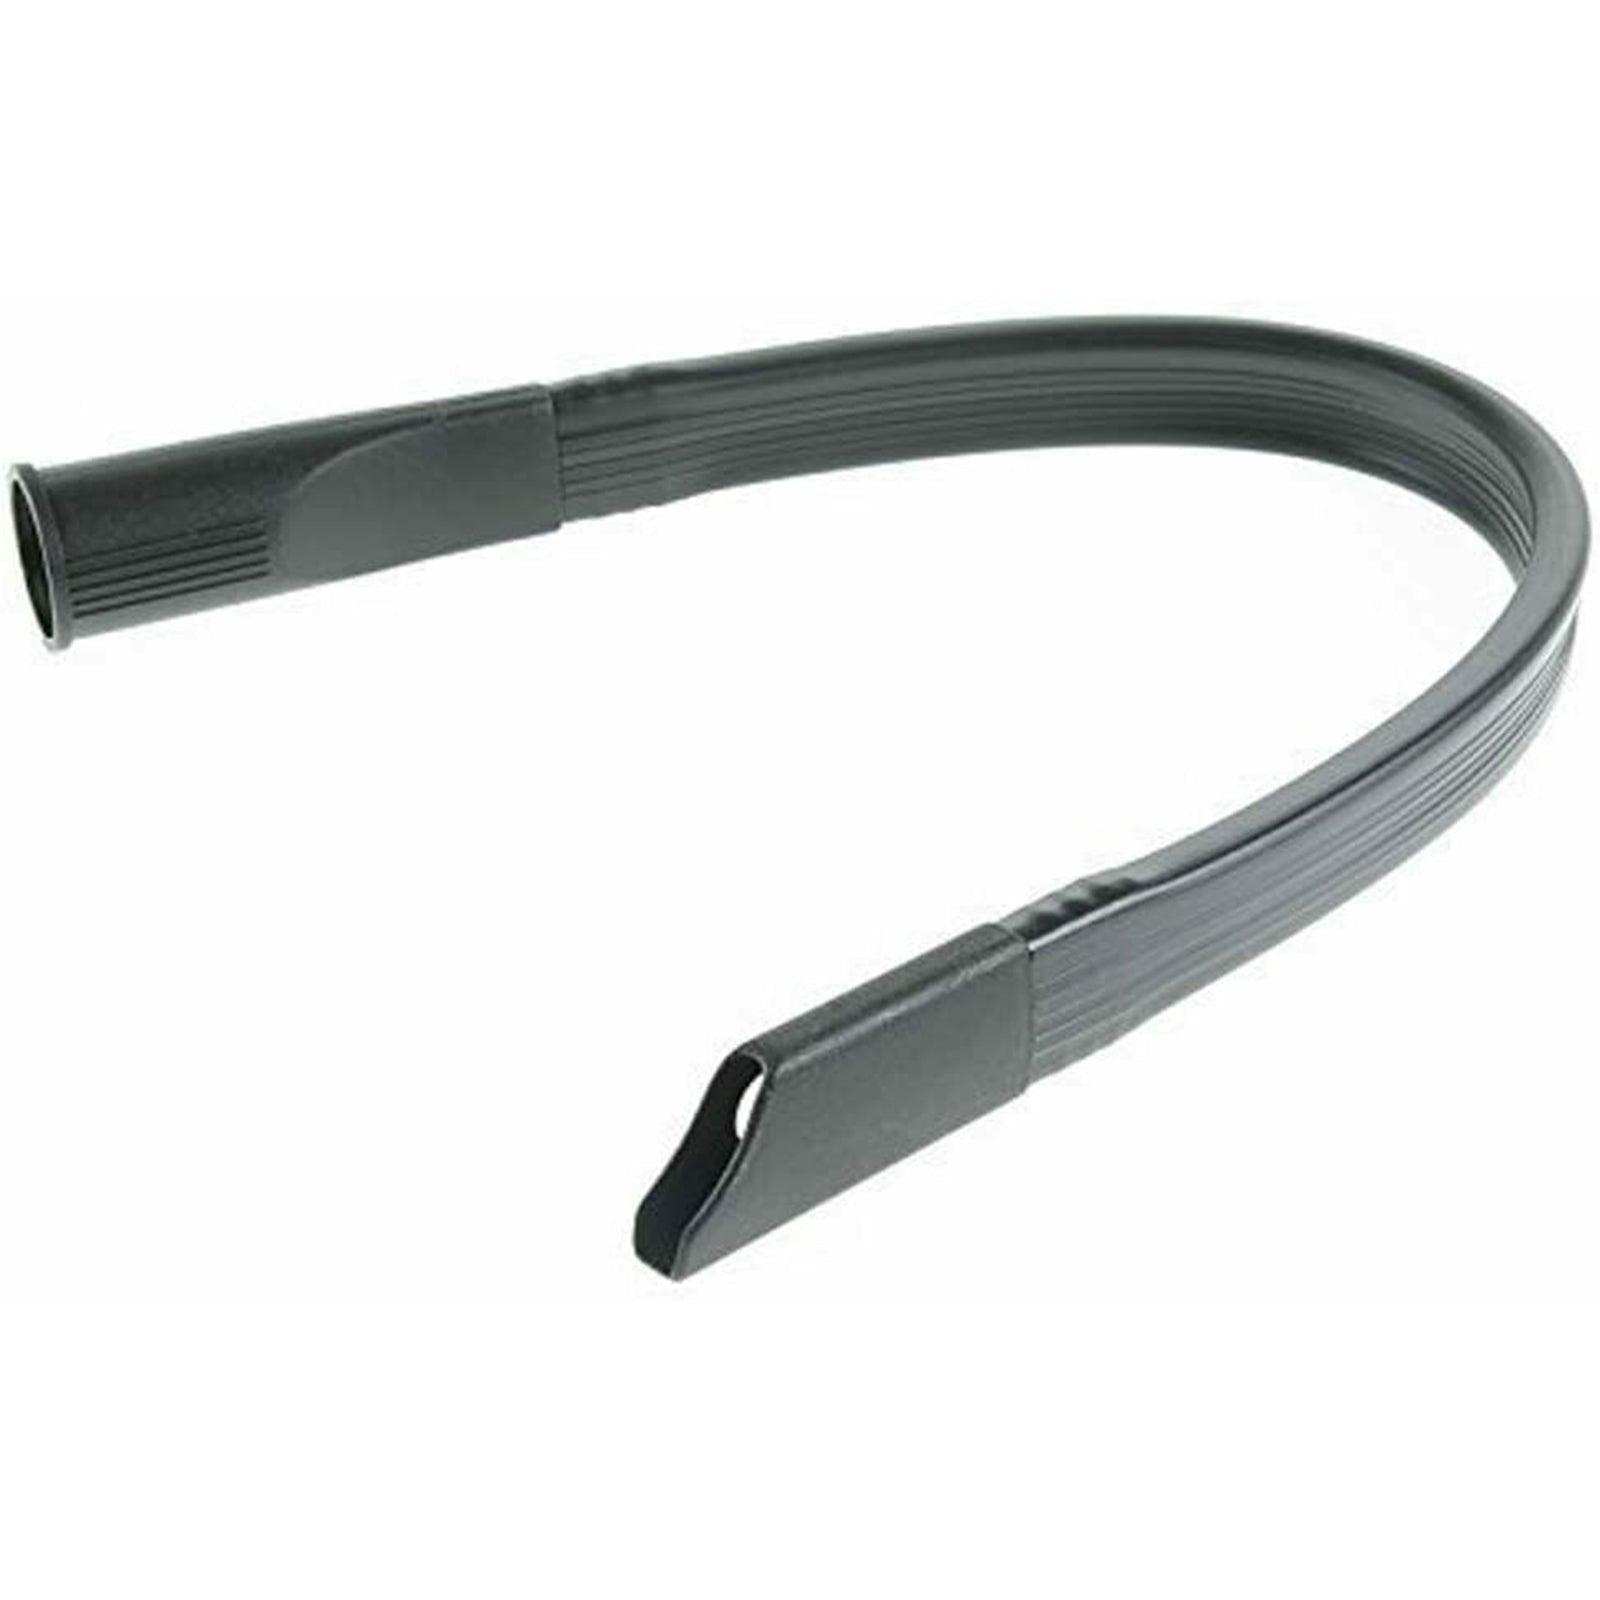 Flexible Crevice Tool Extra Long compatible with TESCO Vacuum Cleaner (32mm)